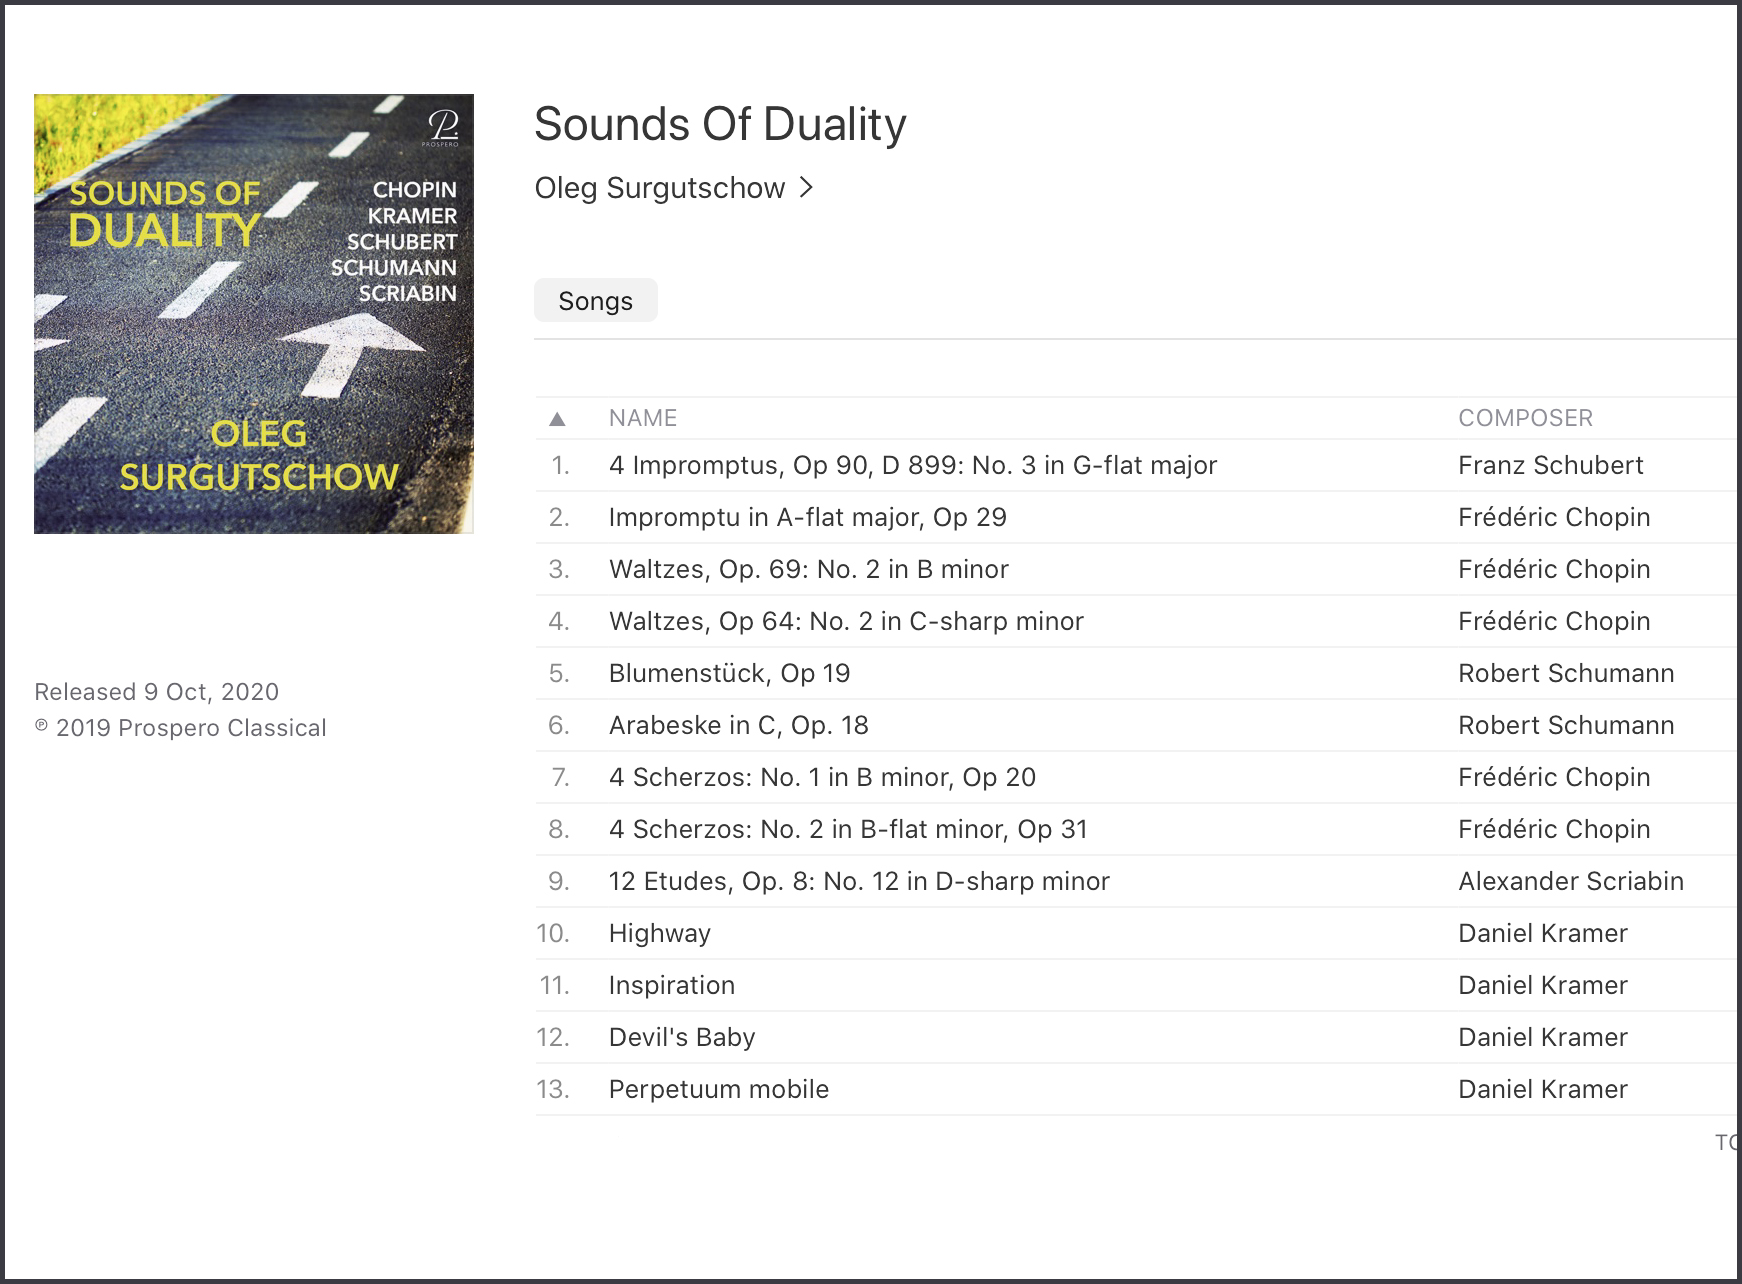 Tracklisting "Sounds of Duality"